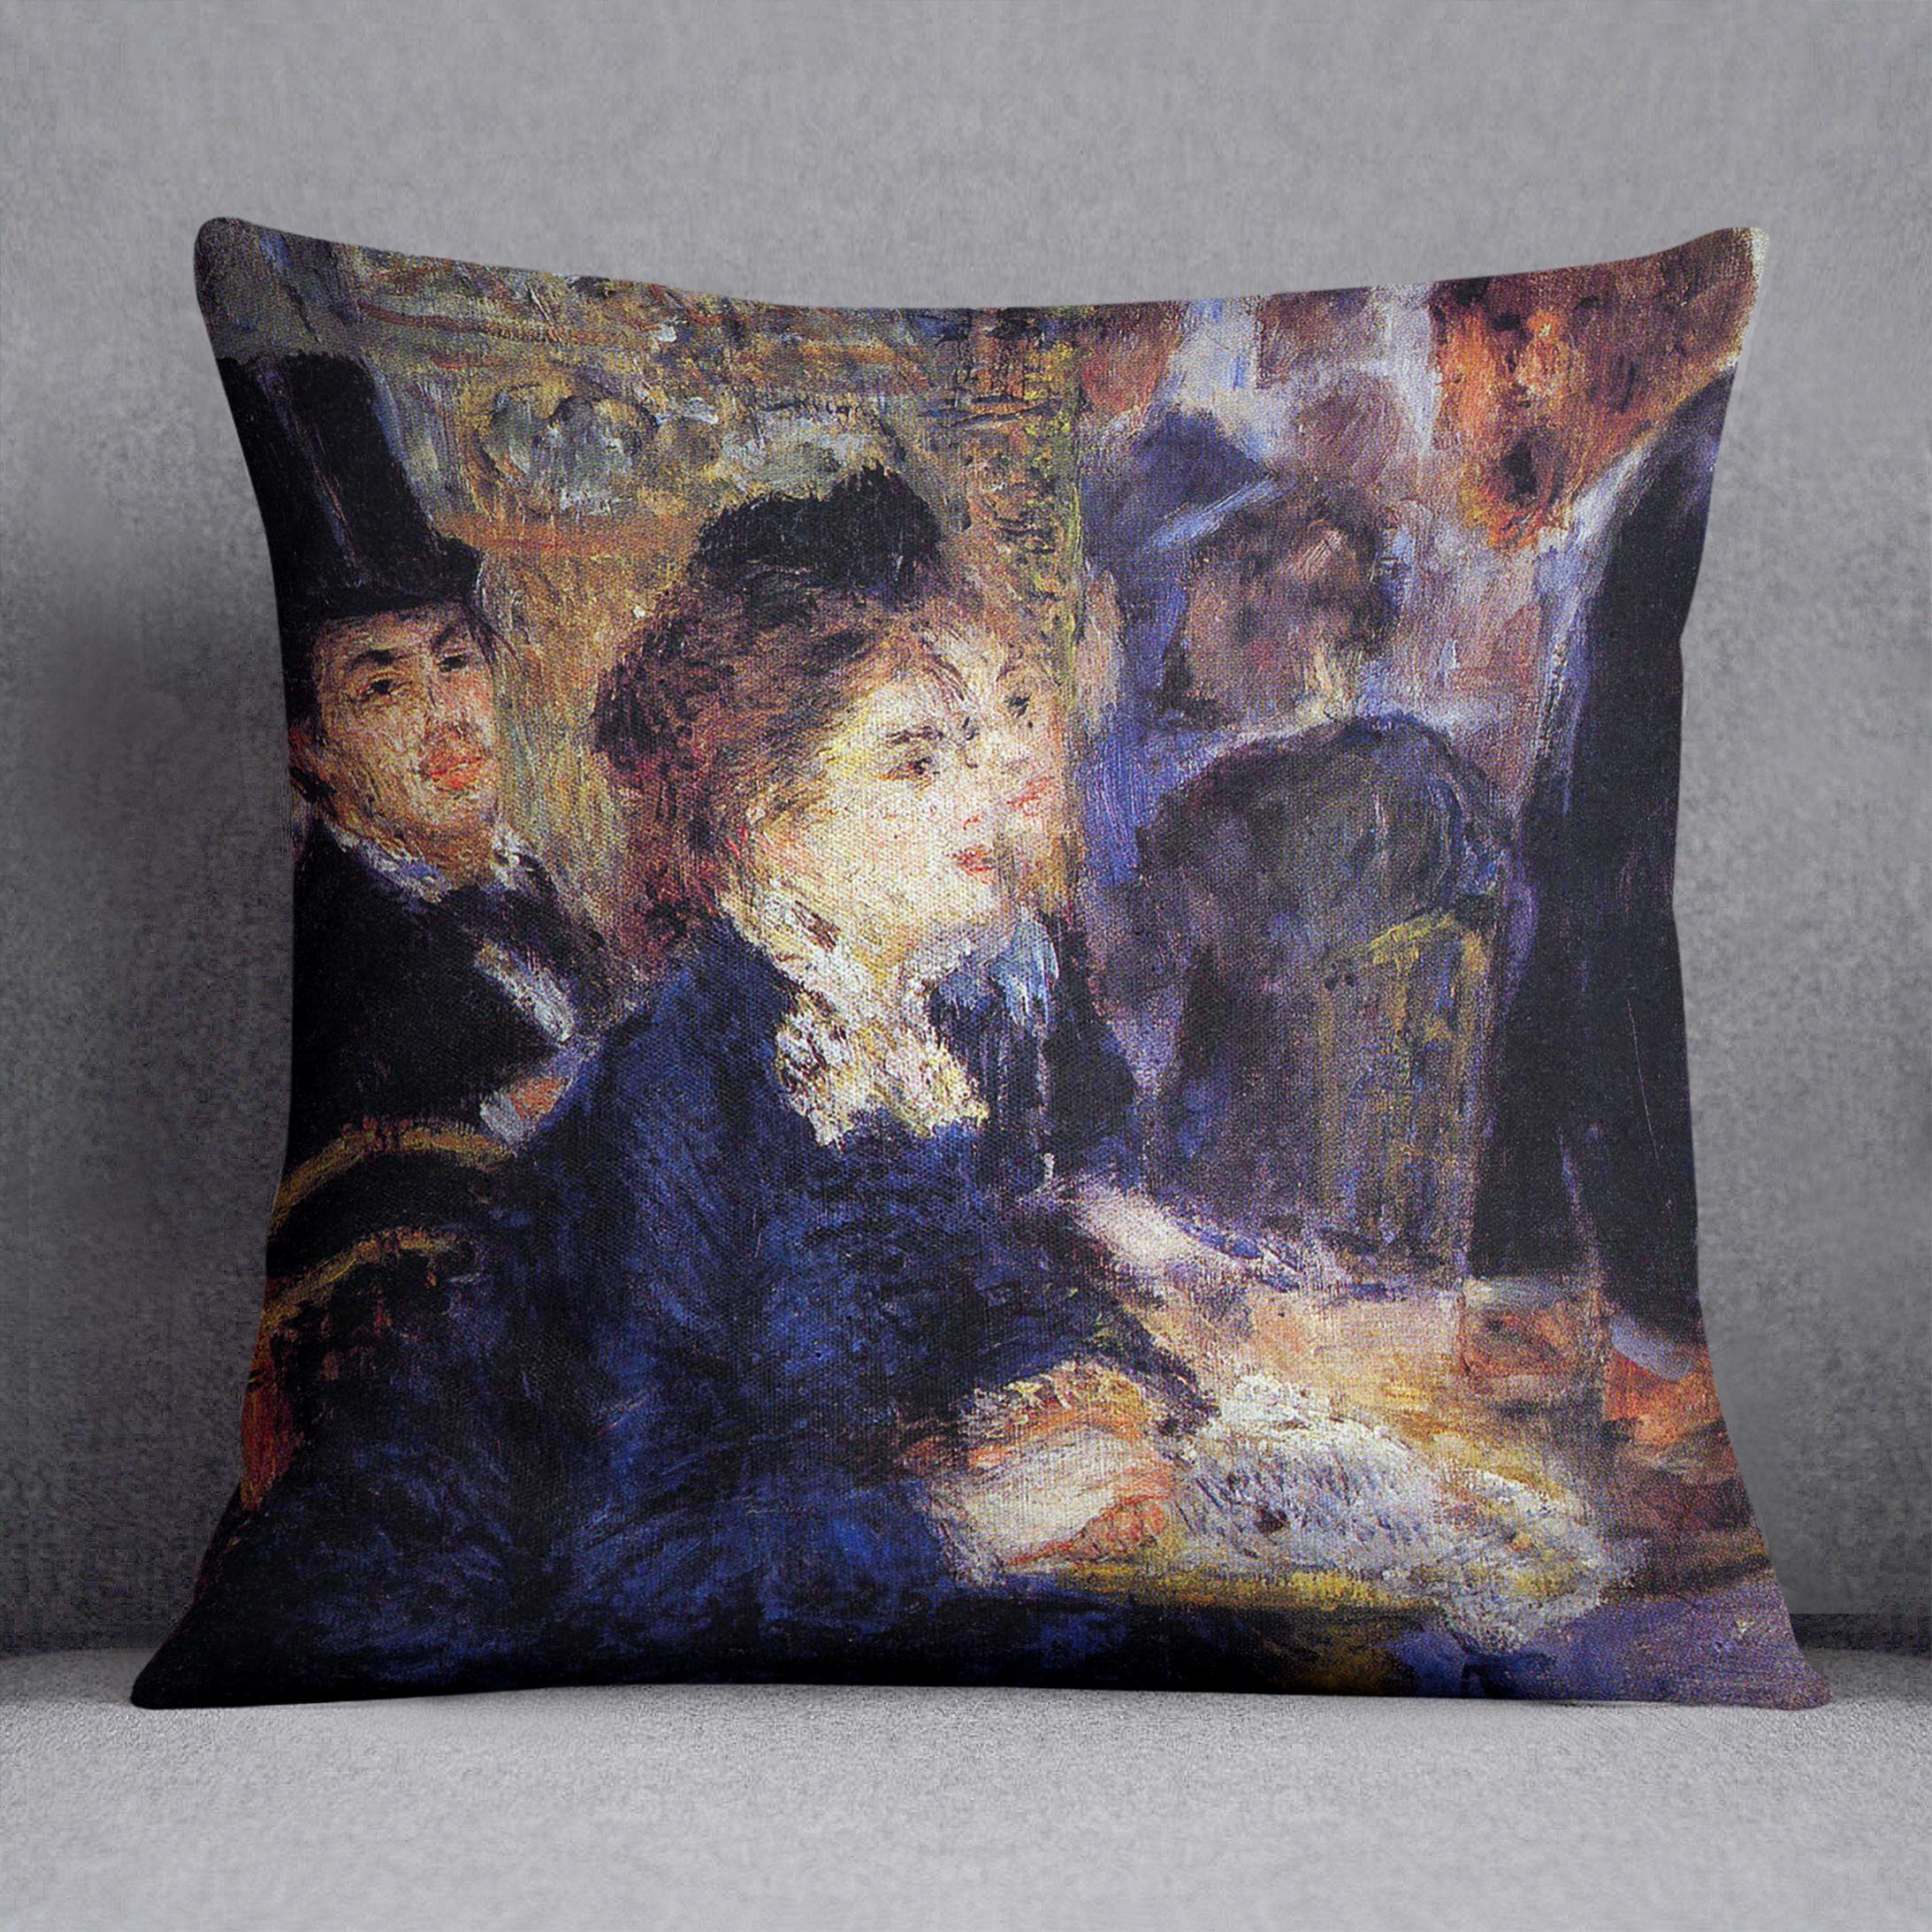 In the Cafe by Renoir Cushion